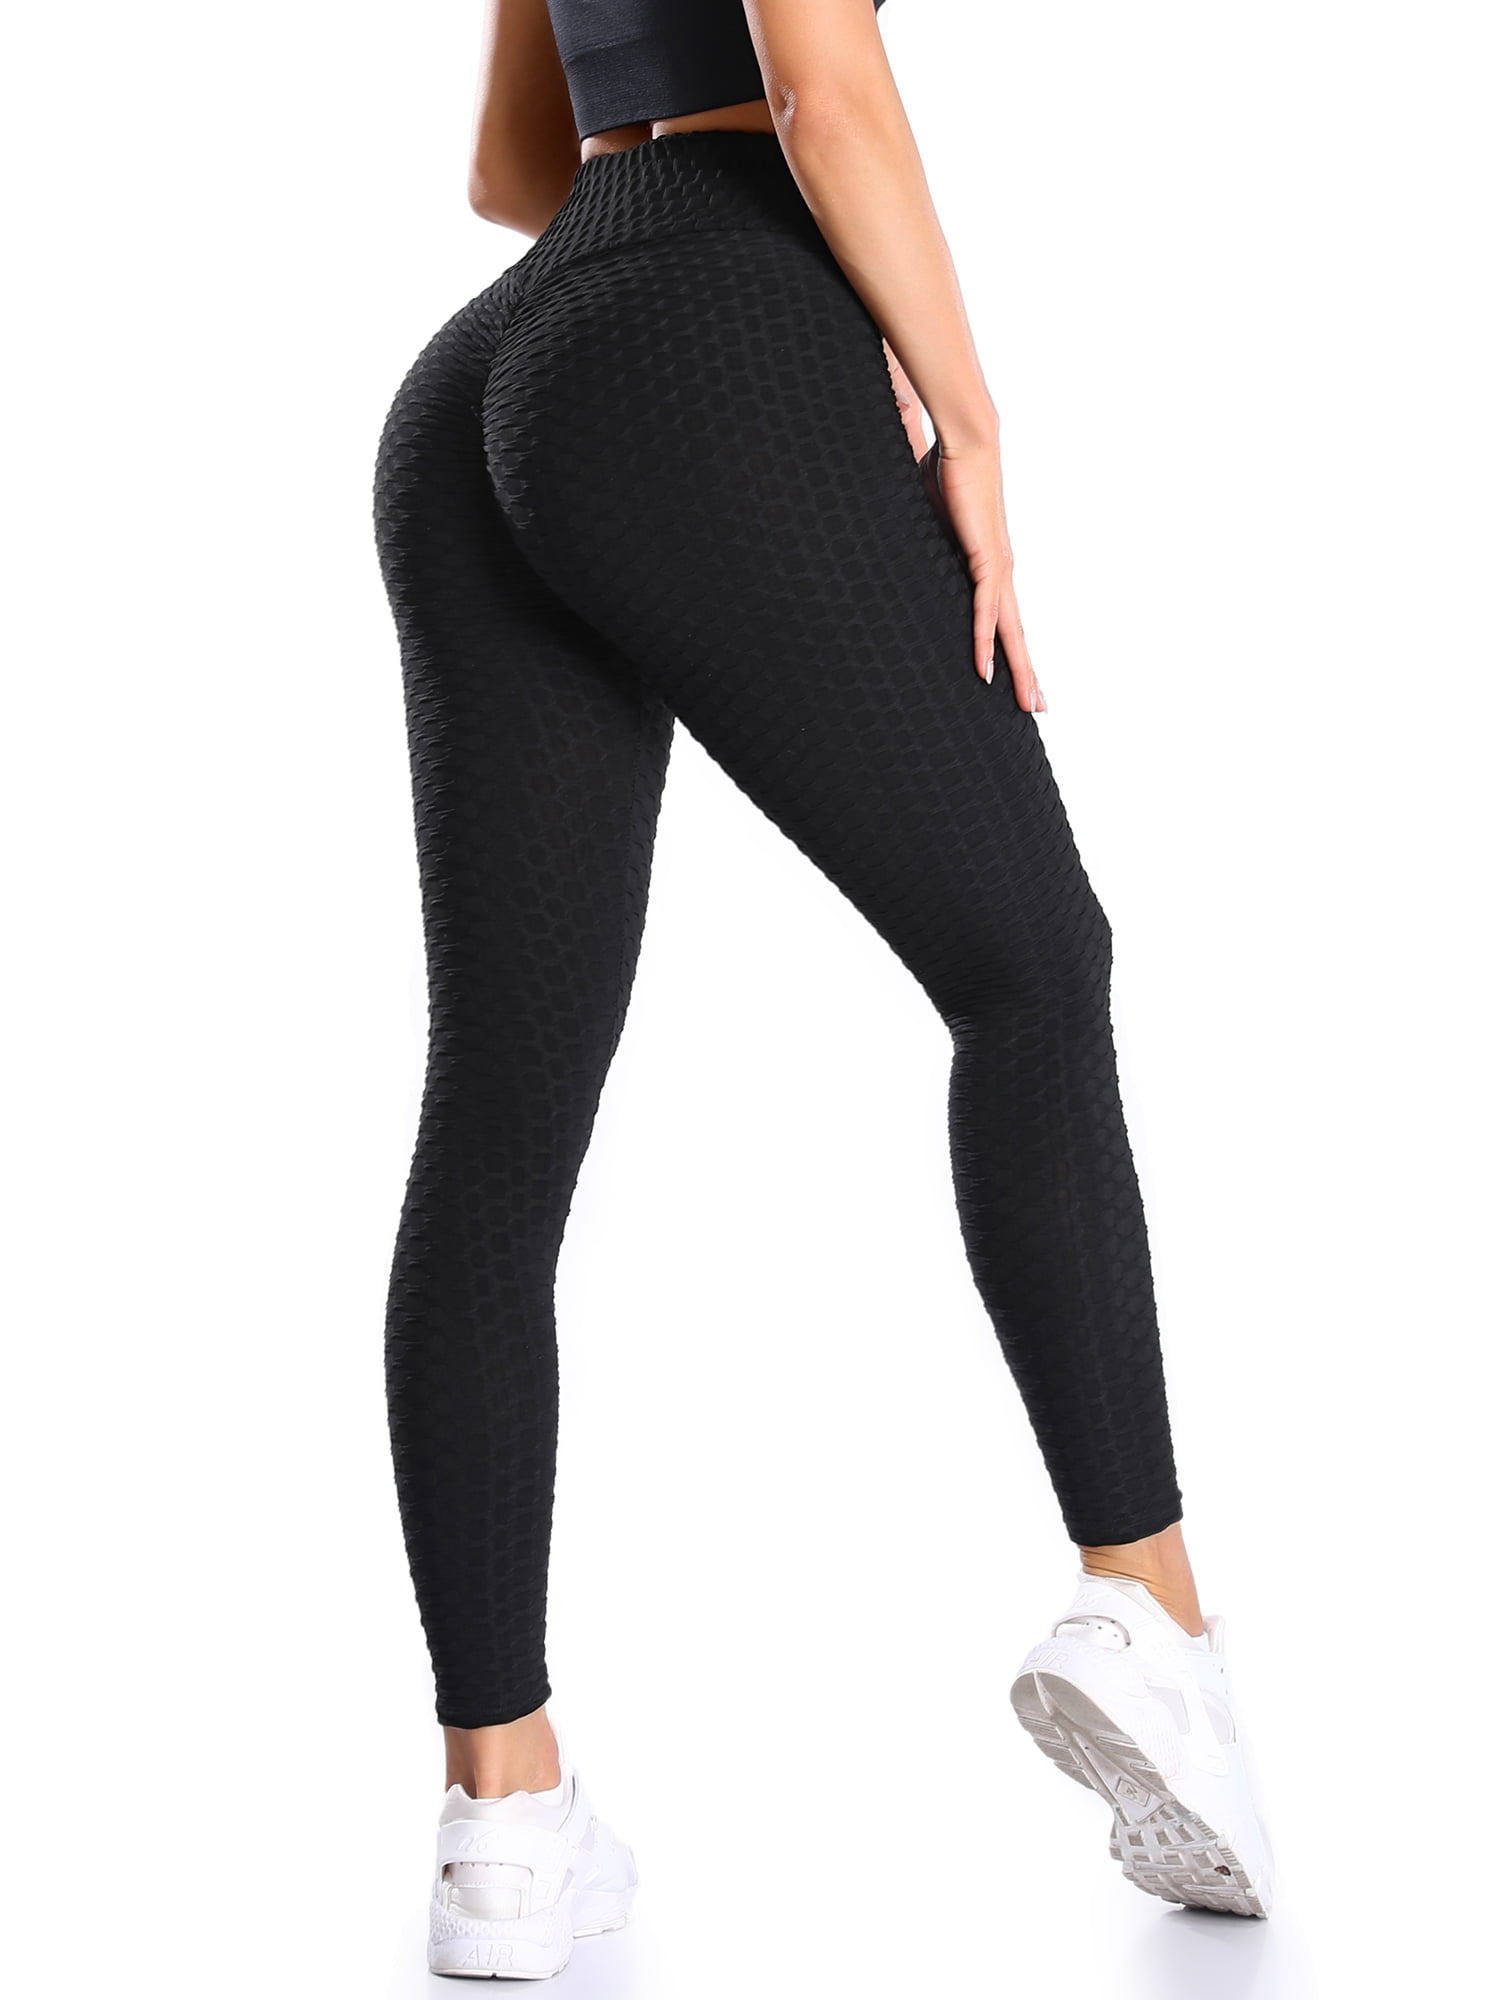 CFR Women Honeycomb Textured Anti Cellulite Black Gym Leggings High Waisted Laides Yoga Pants Compression Tights Ruched Butt Workout Sports Leggings 